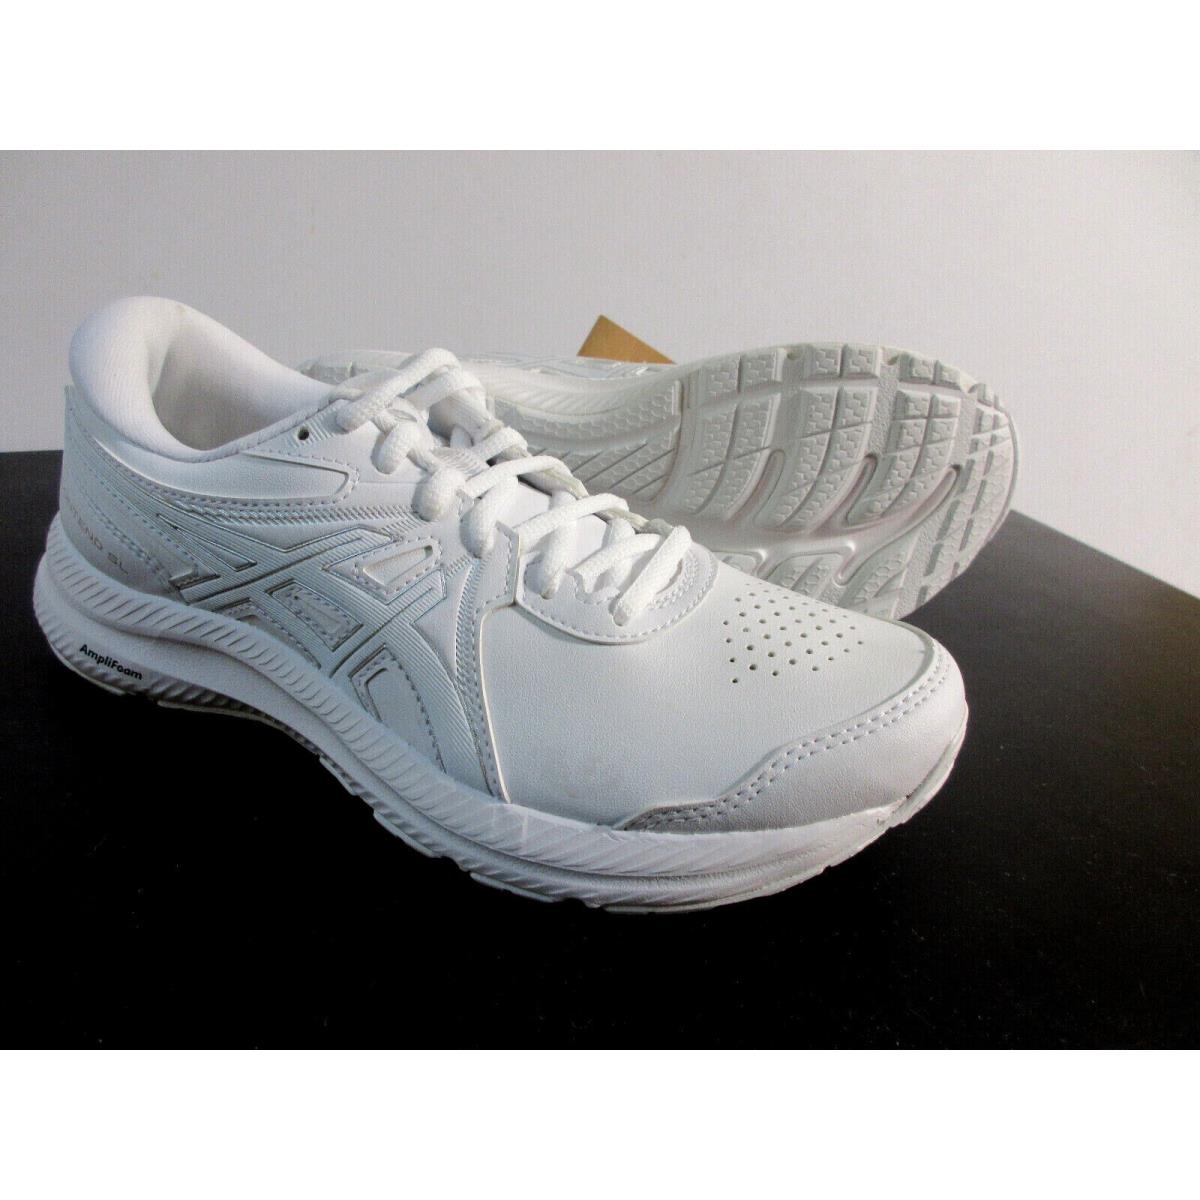 Womens Asics Gel Contend SL Shoes White 1132A057-100 Size 6.5 M